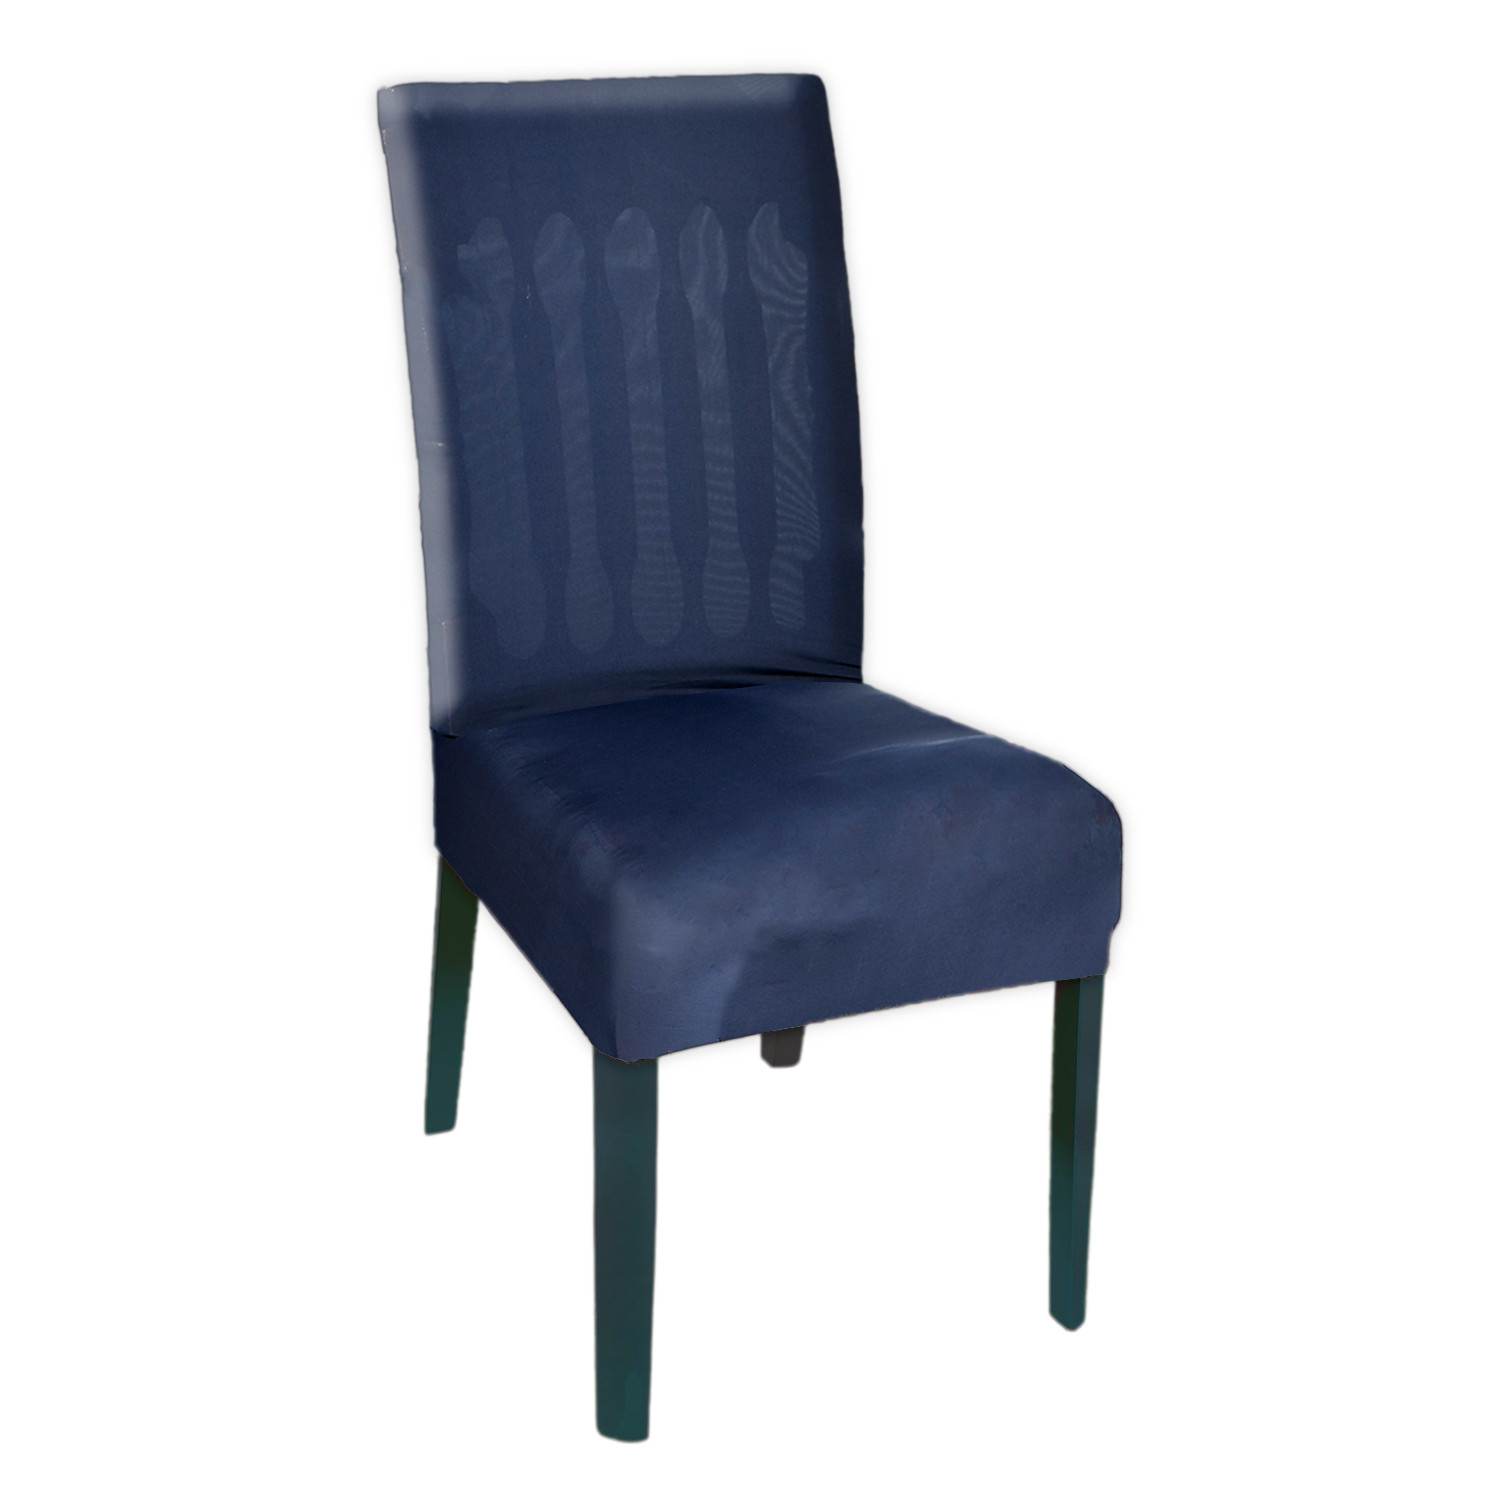 Kuber Industries Elastic Stretchable Polyster Chair Cover For Home, Office, Hotels, Wedding Banquet (Blue)